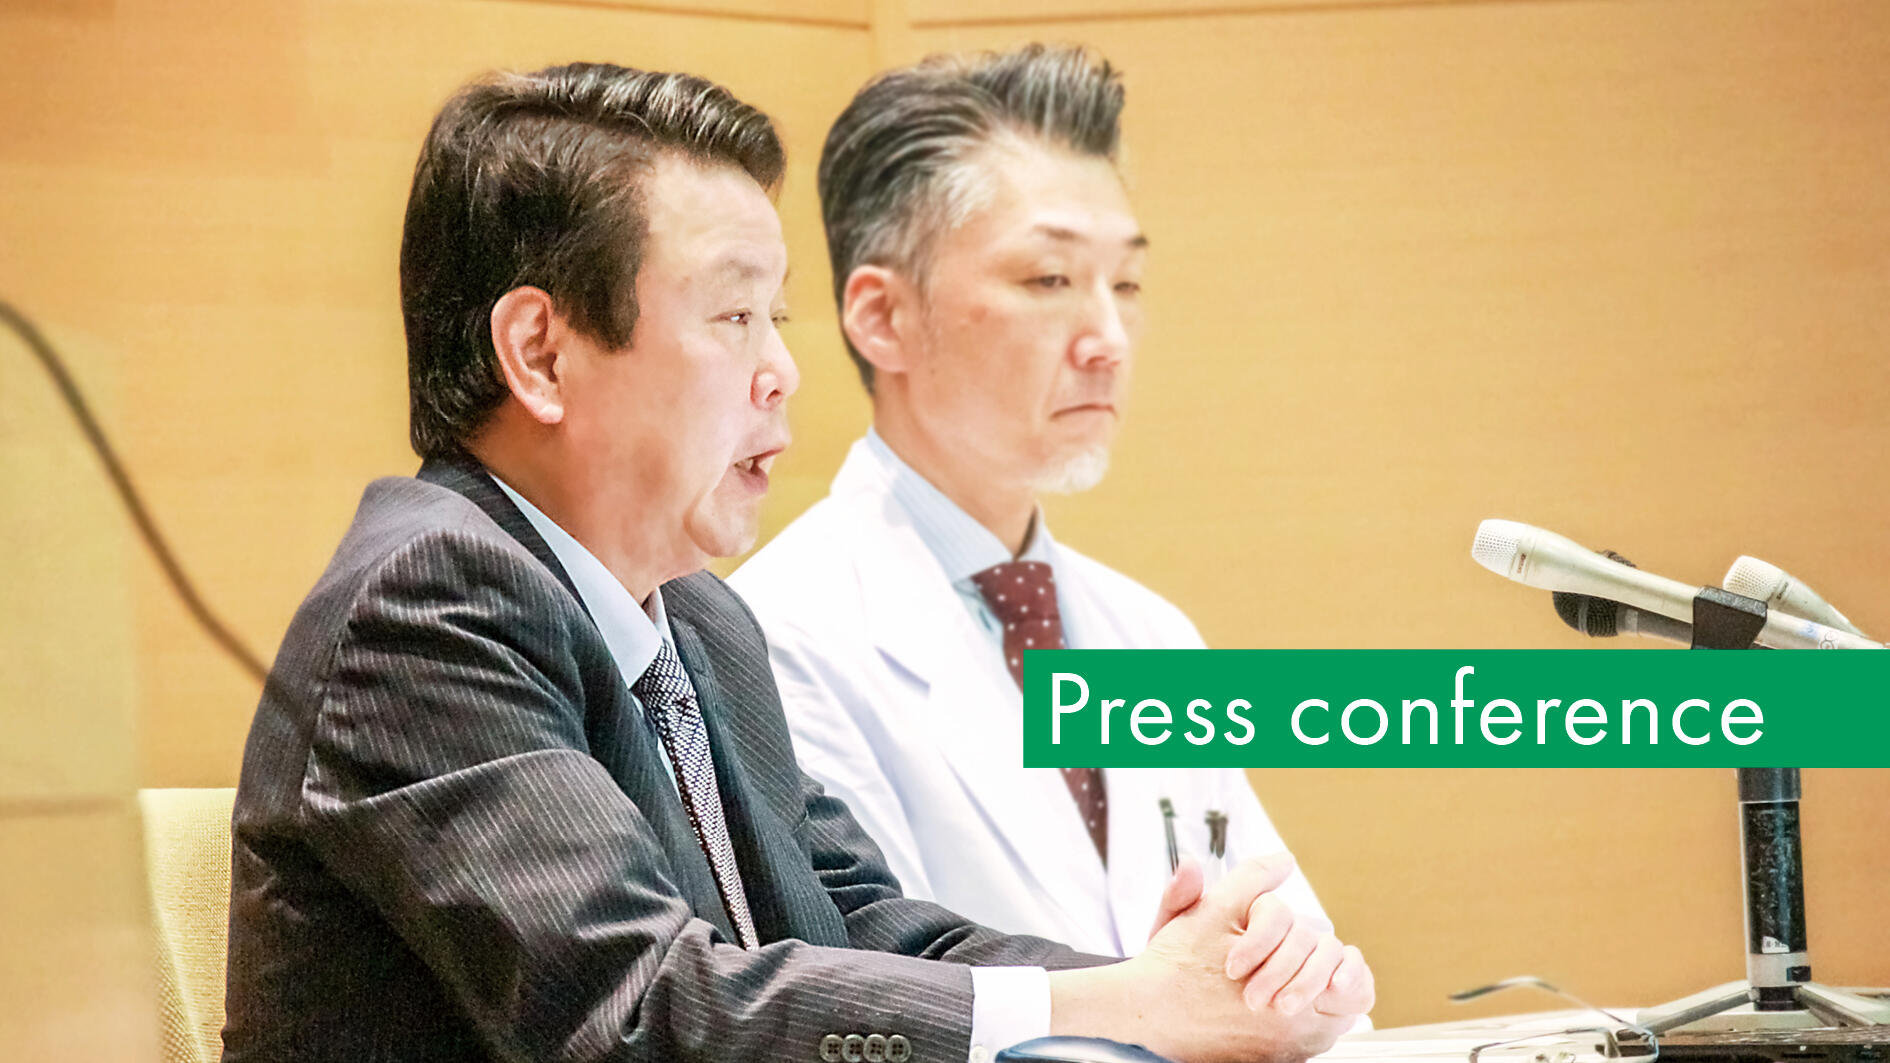 Press conference held to announce the commencement of an international trial for inherited Alzheimer's disease